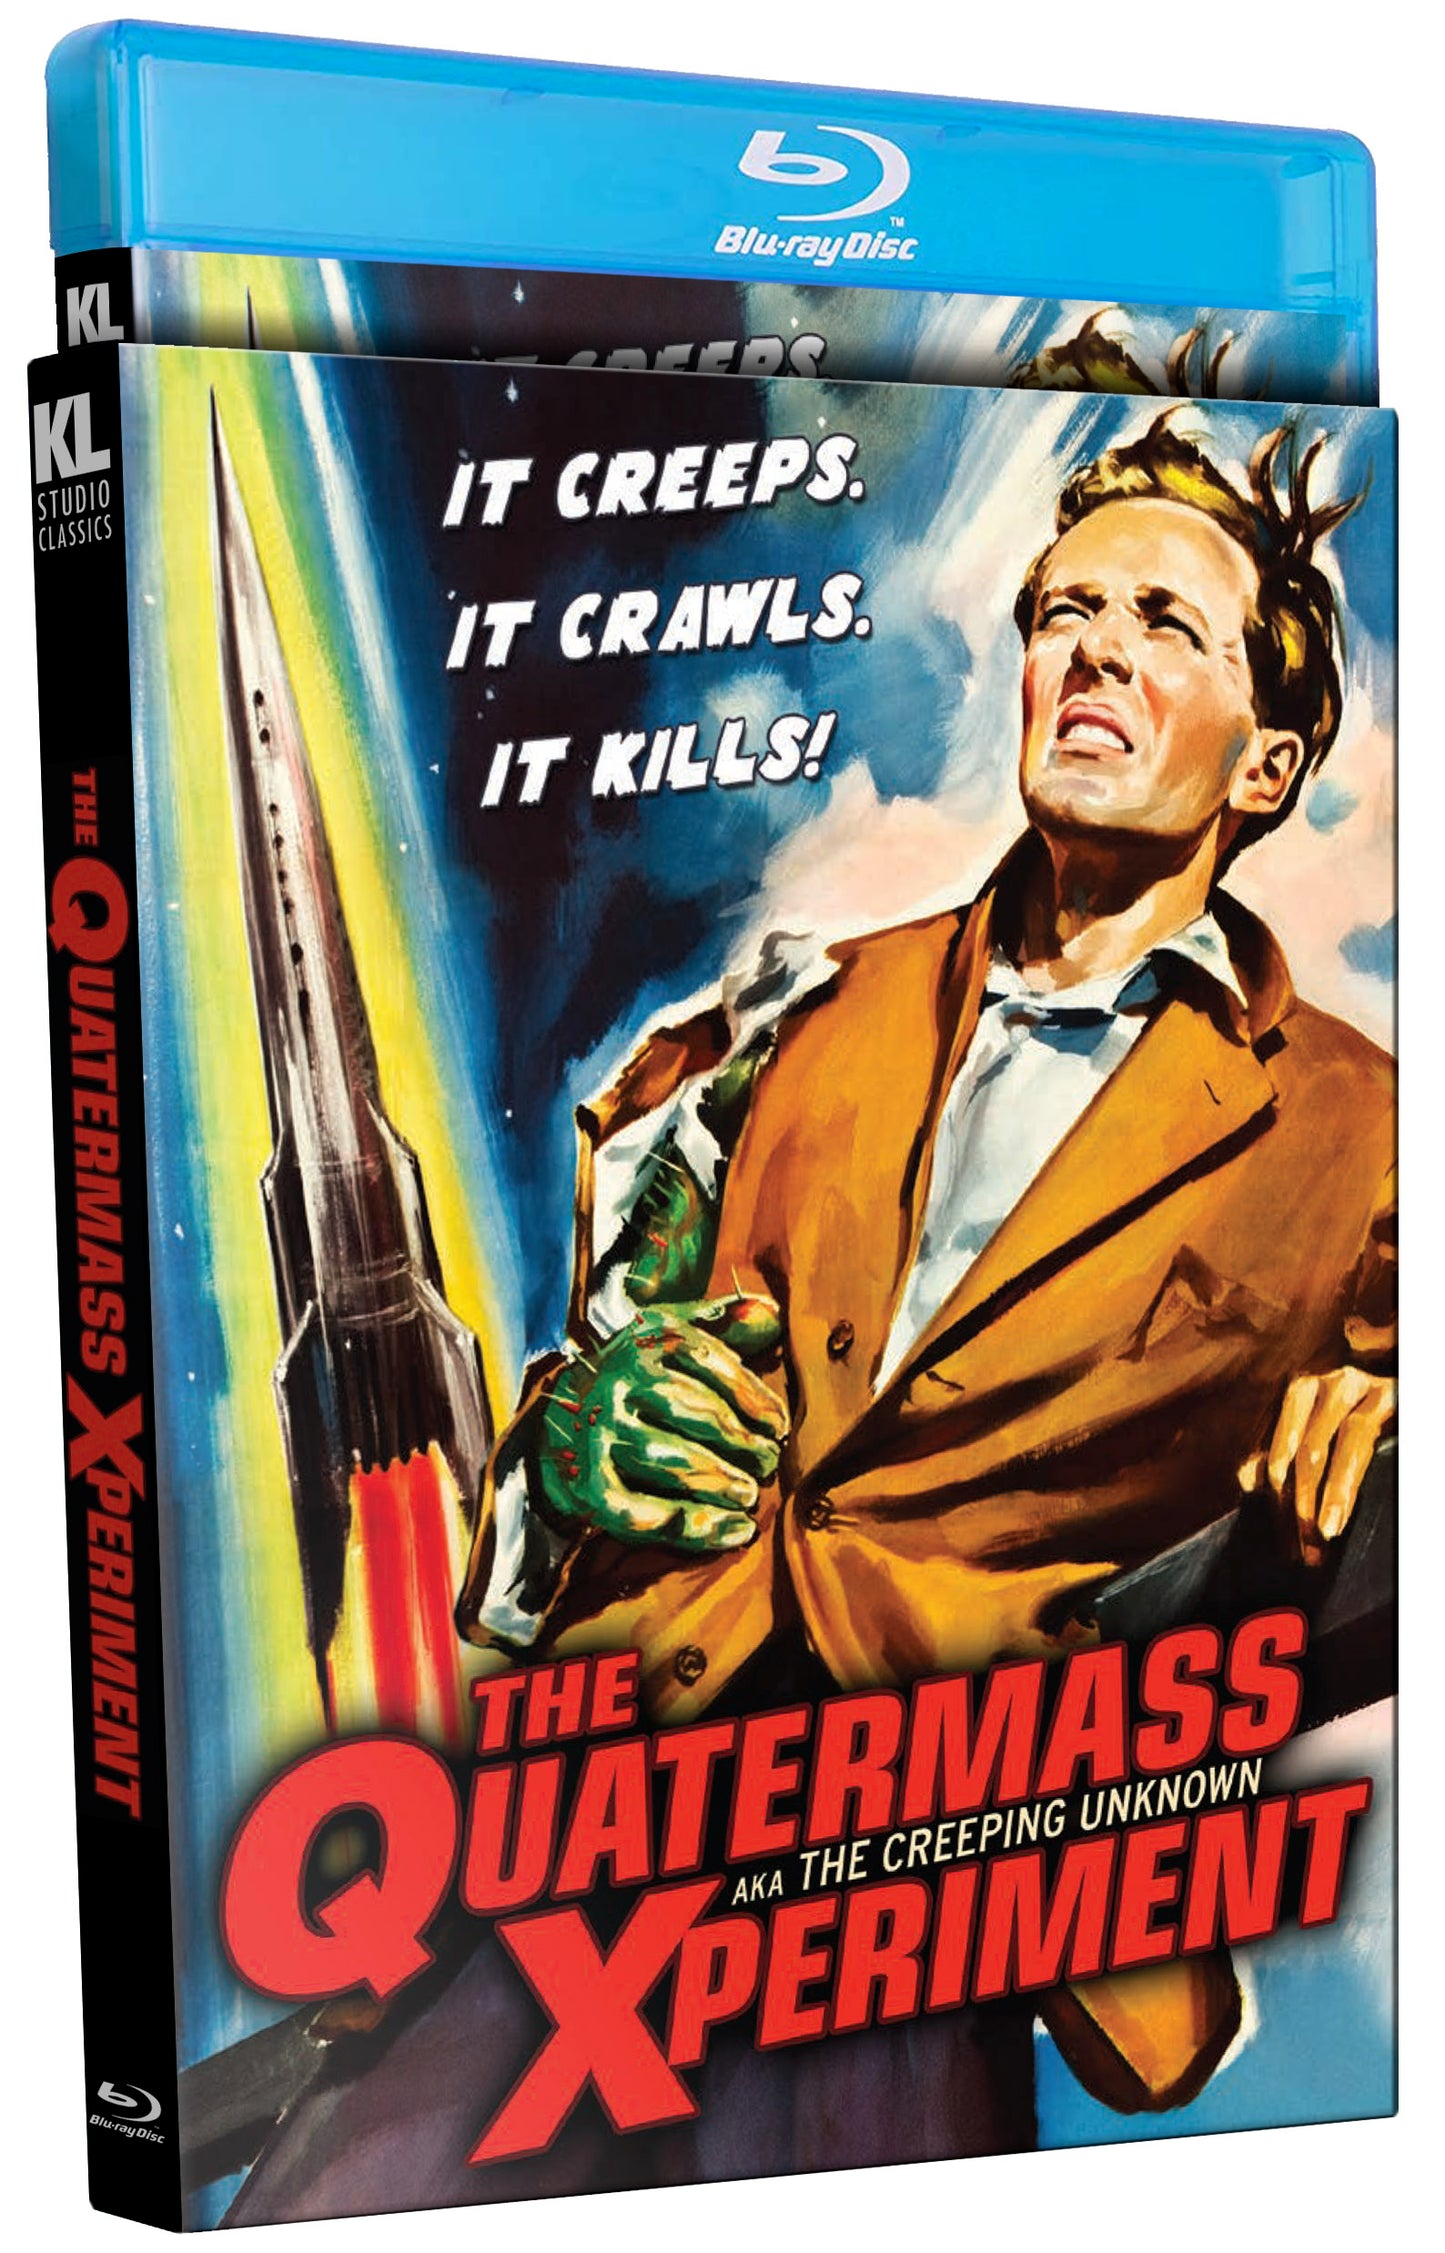 The Quartermass Xperiment Blu-ray Special Edition with Slipcover (Kino Lorber) [Preorder]